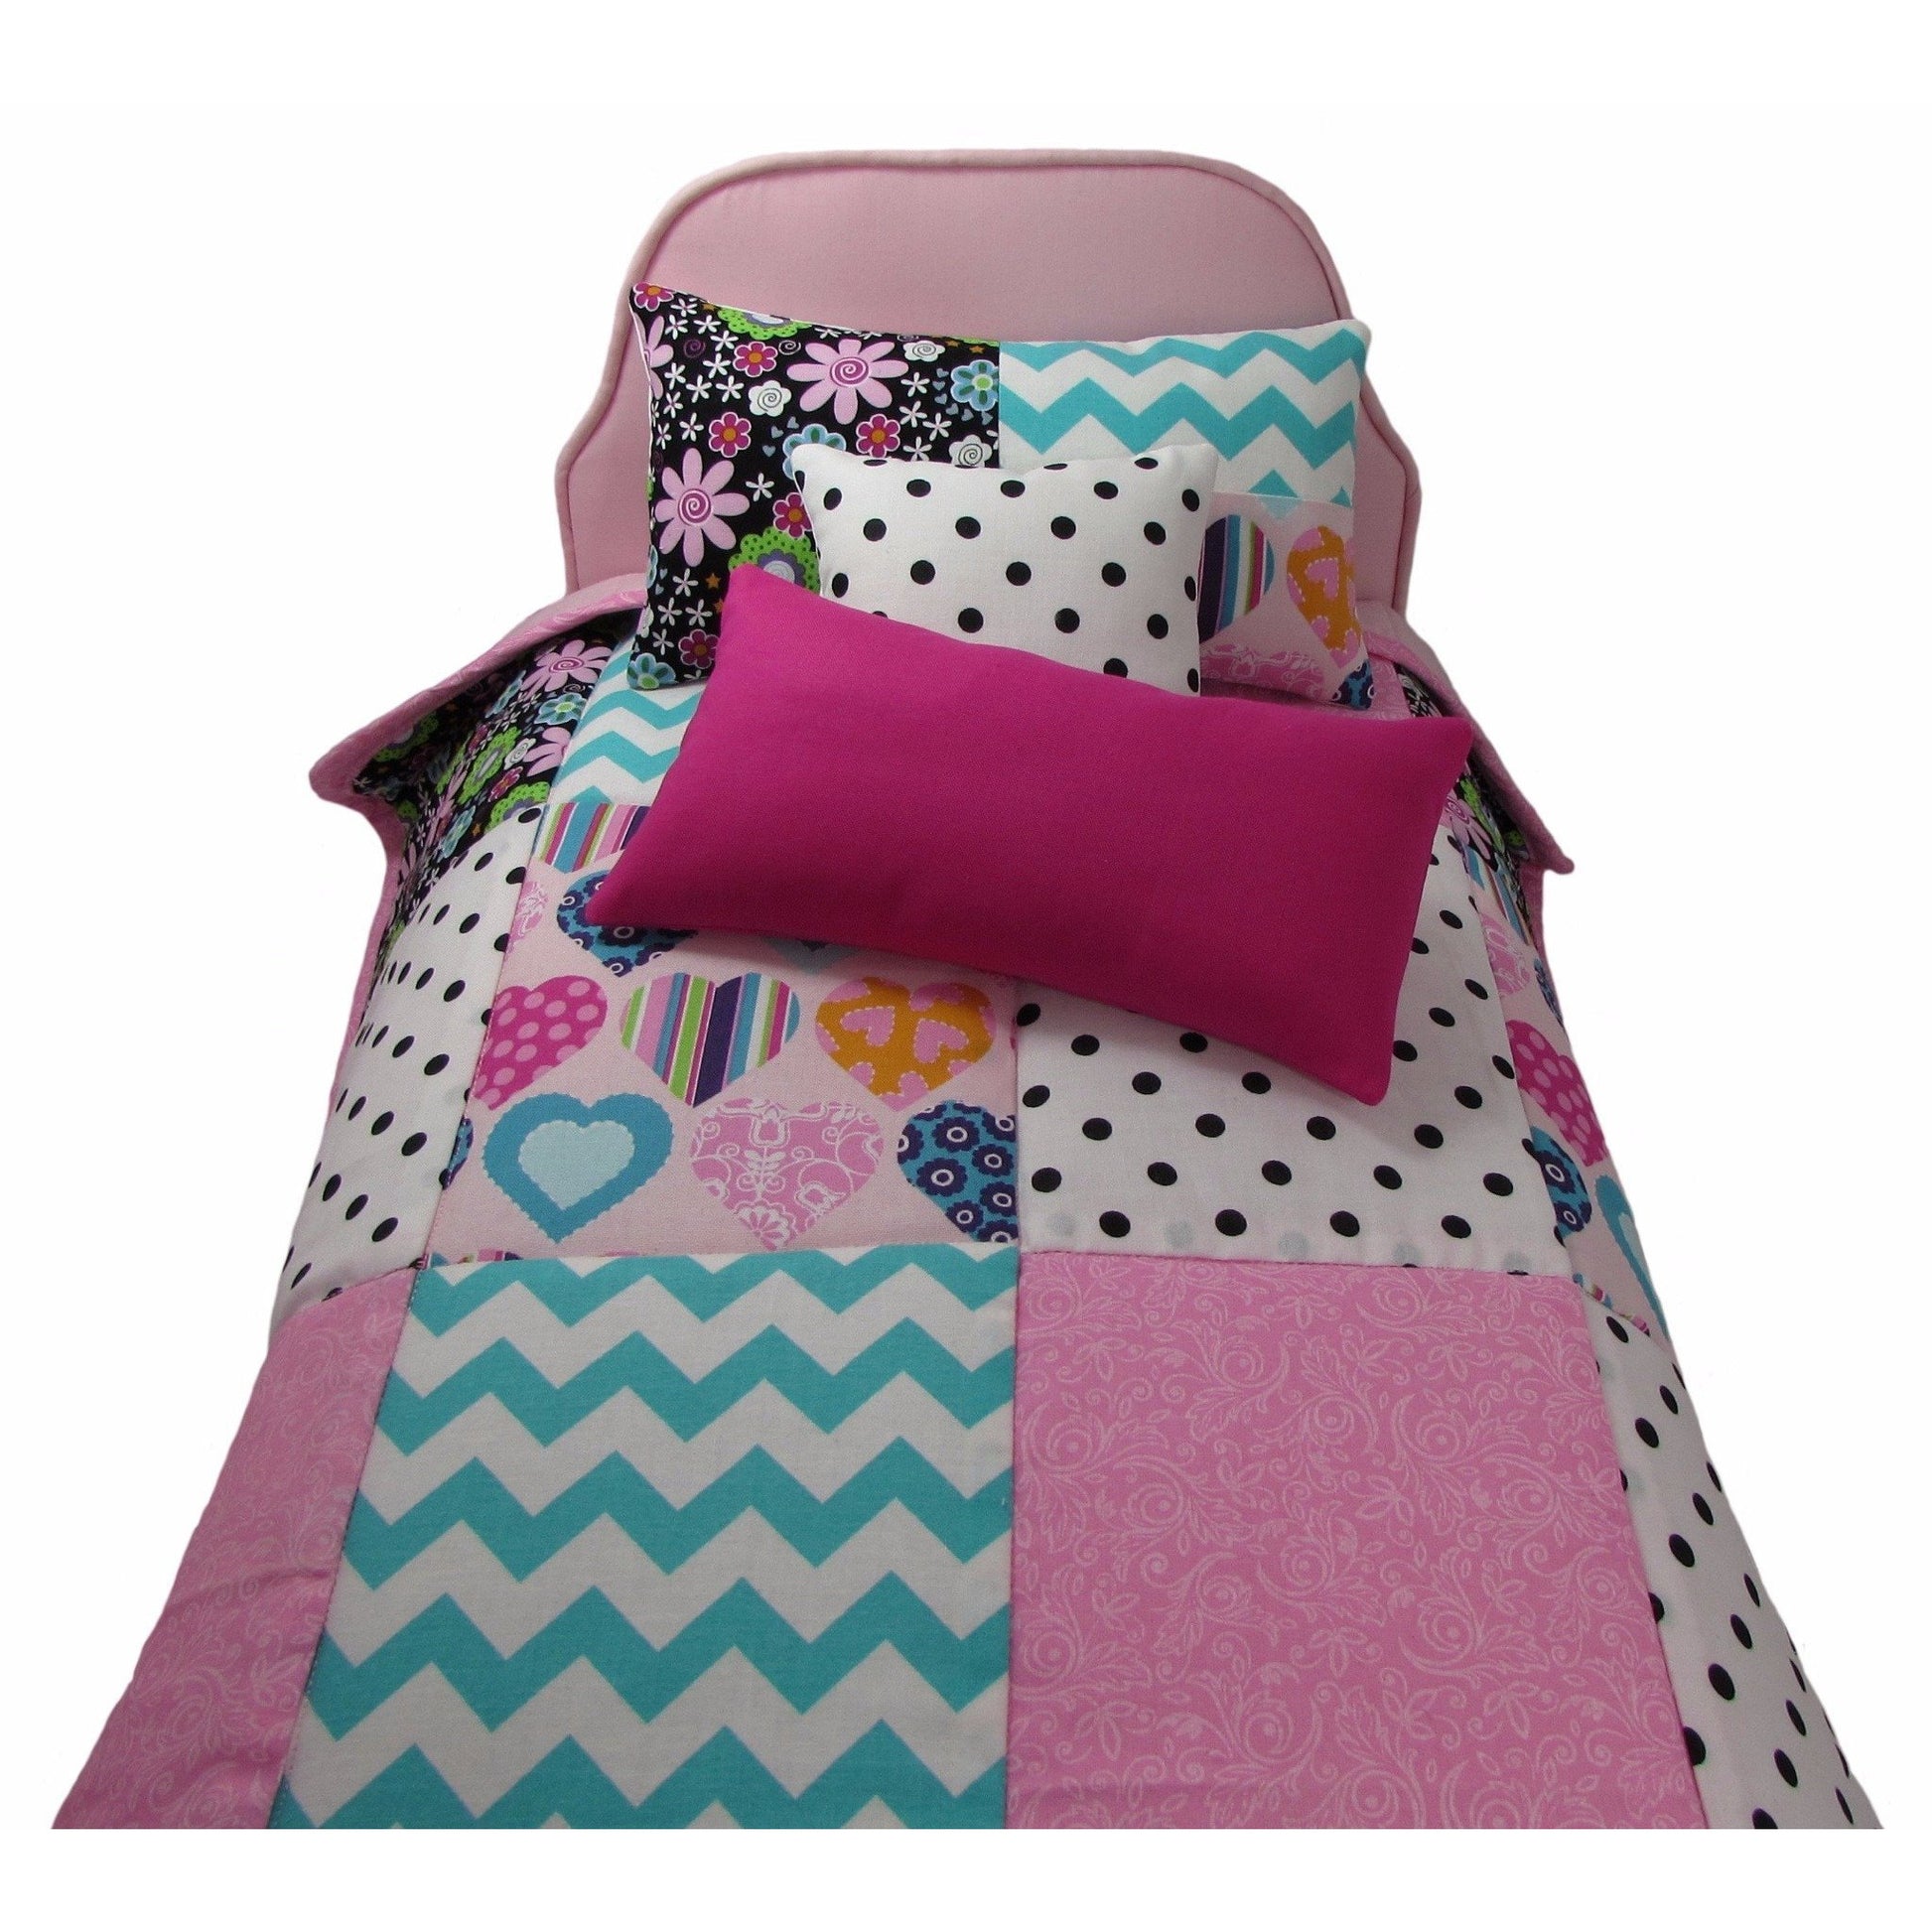 Floral, Dots, and Chevron Doll Quilt and Upholstered Pink Doll Bed for 18-inch dolls Up Close